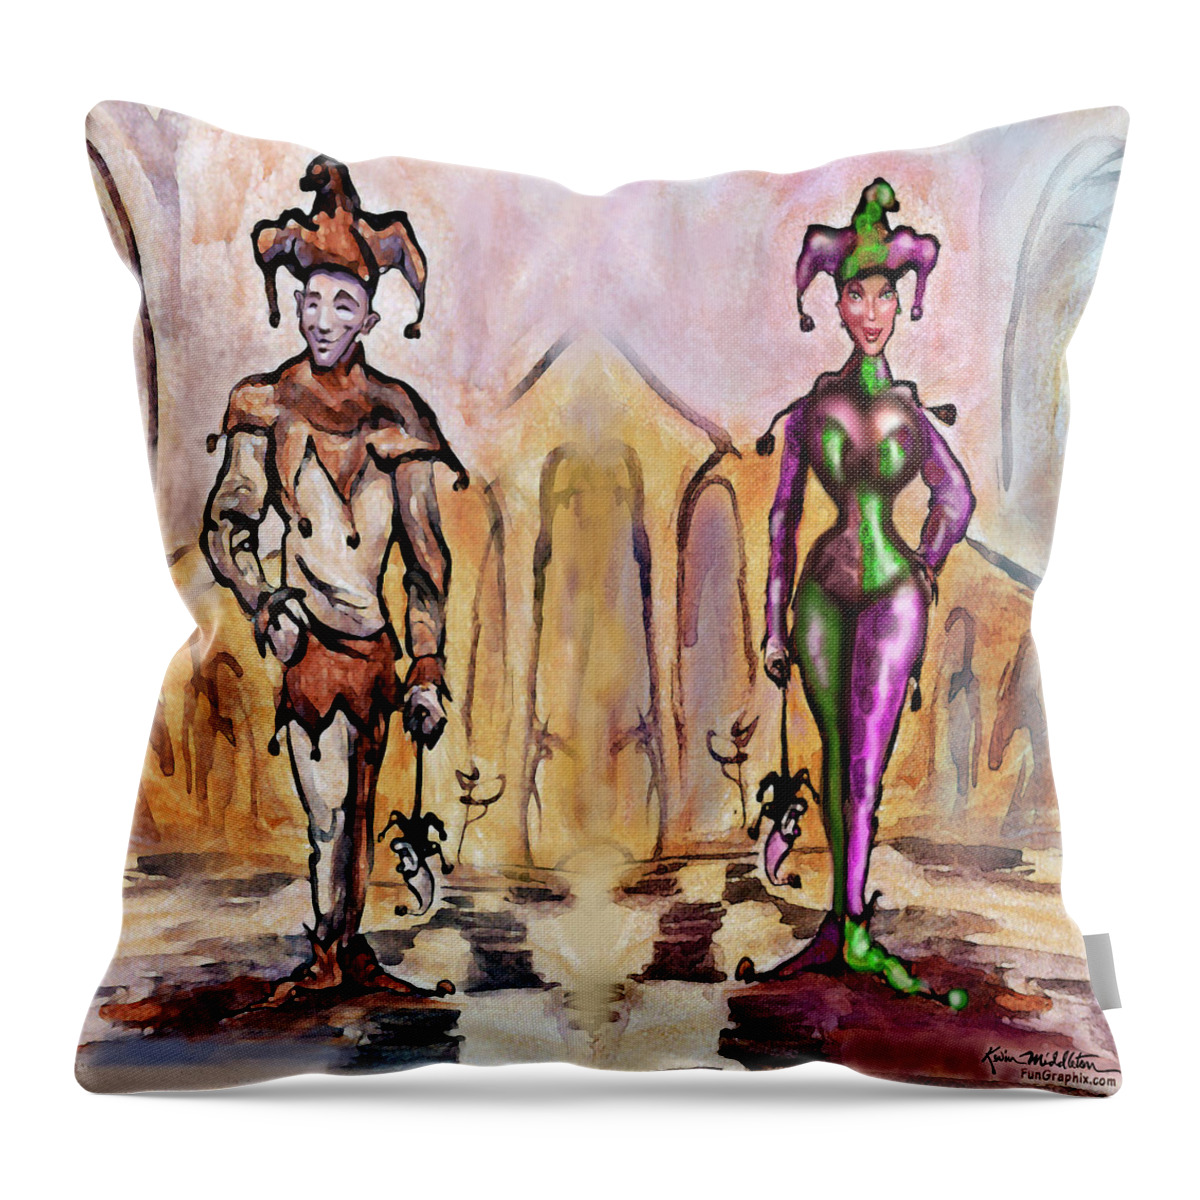 Jesters Throw Pillow featuring the digital art Jesters by Kevin Middleton